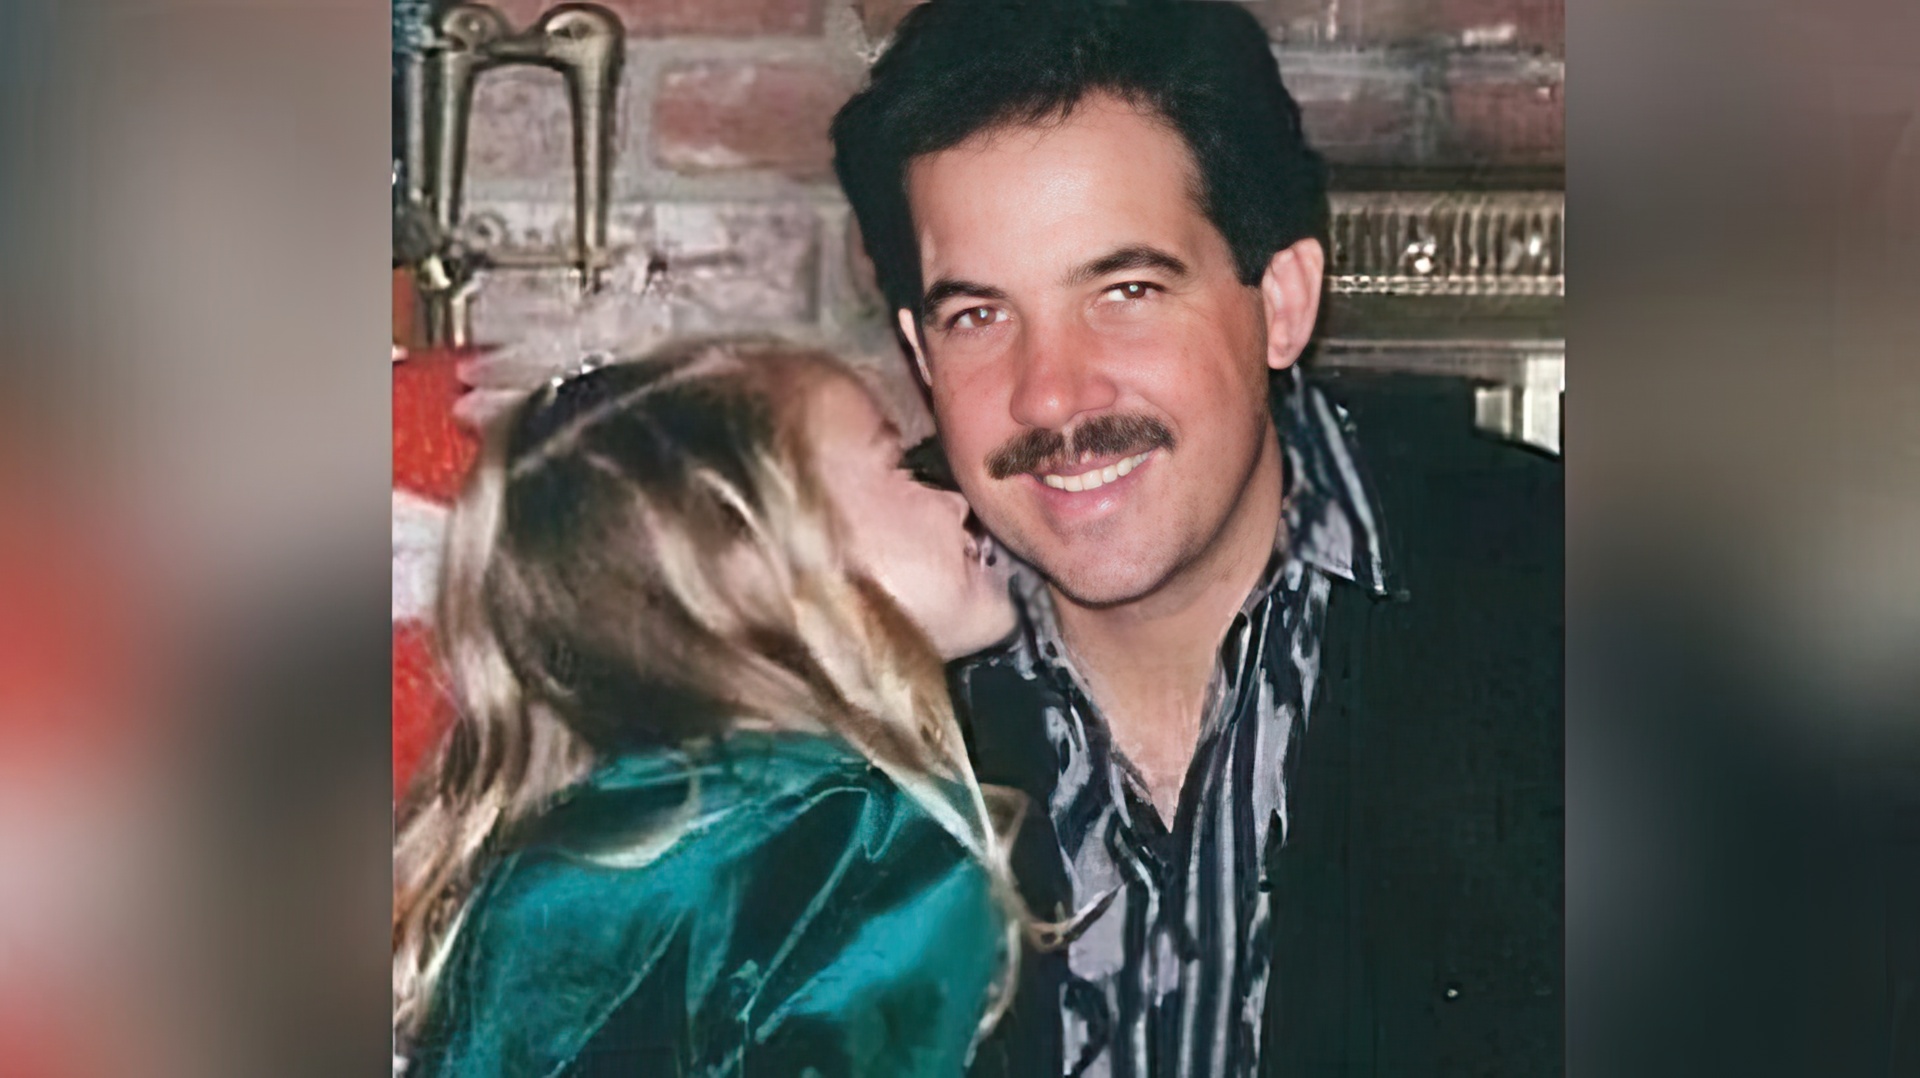 Ashley Benson as a child with her father